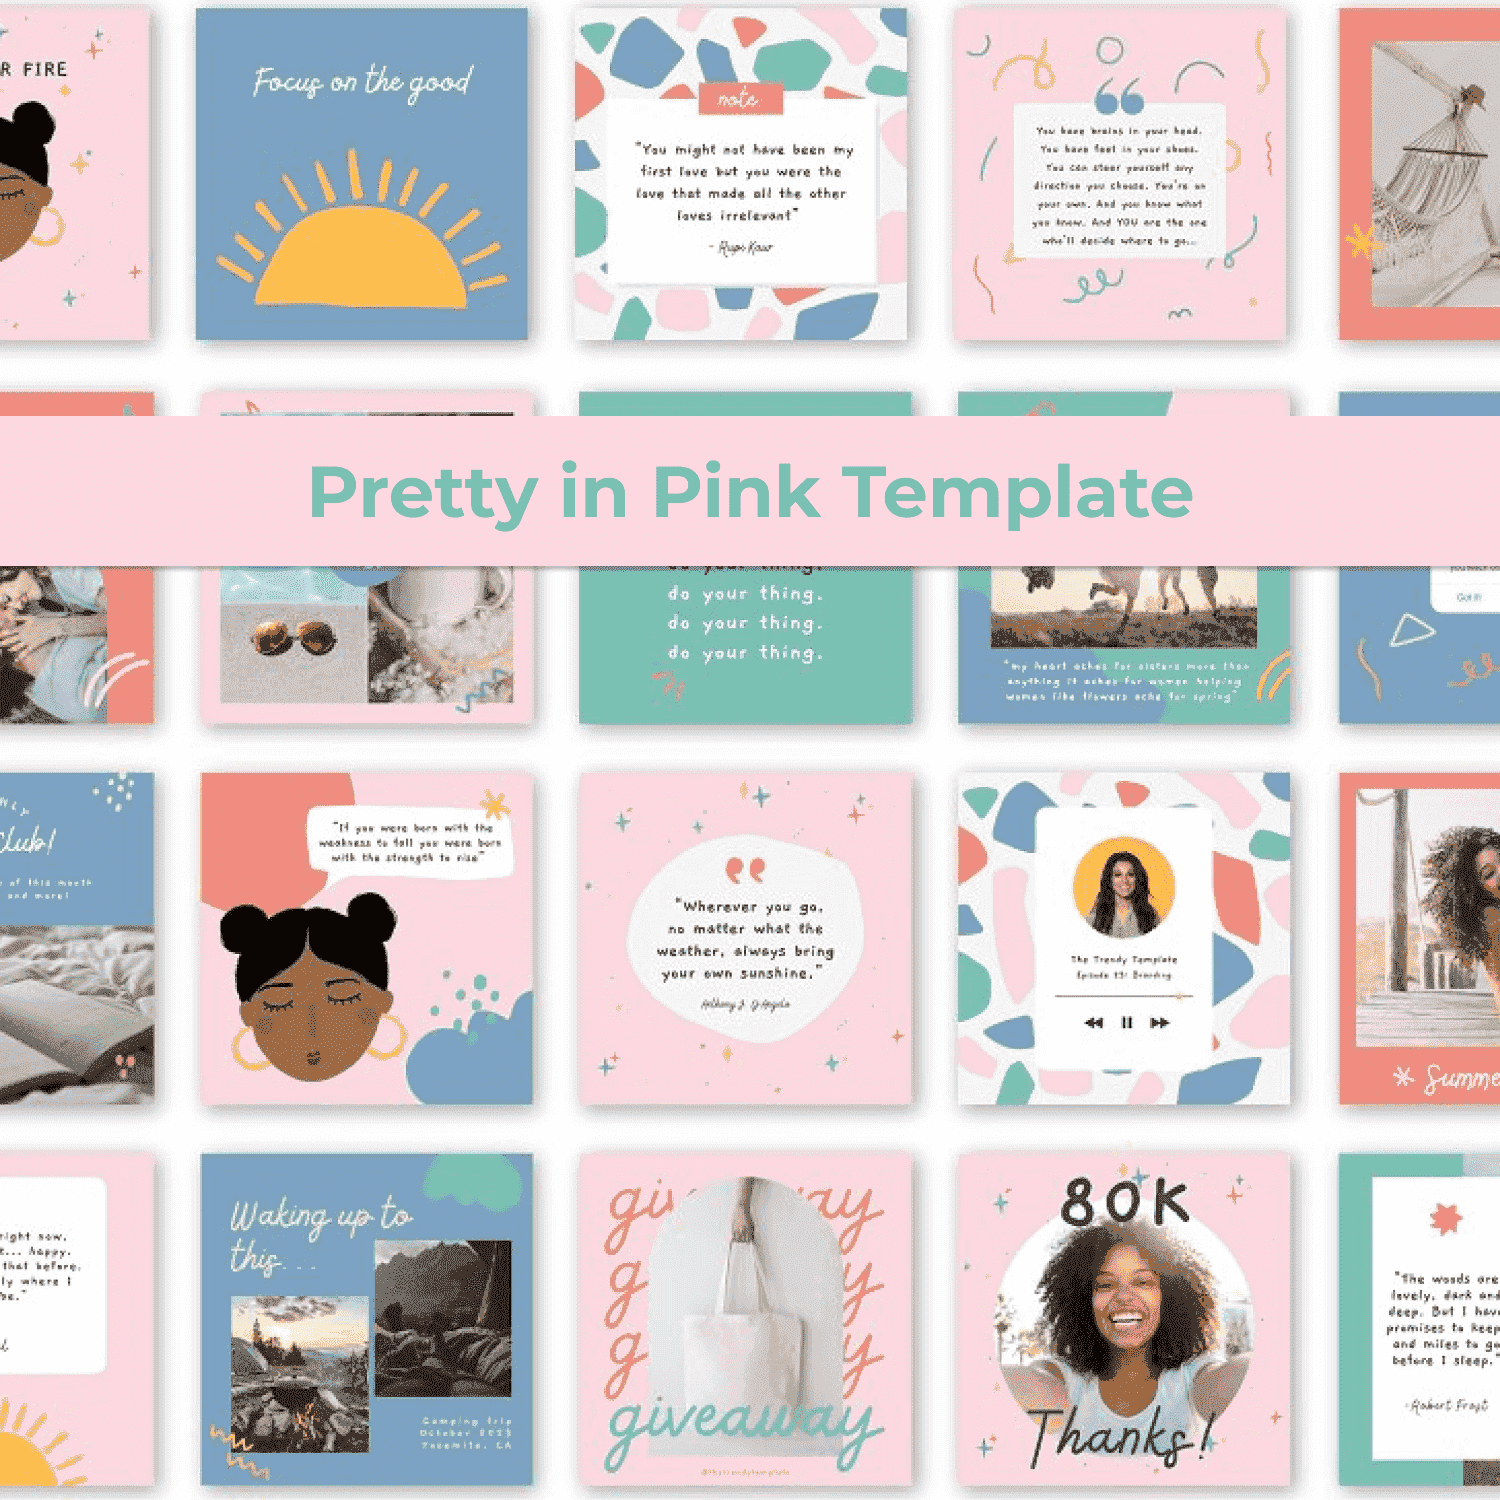 Pretty In Pink Template Preview - "Focus On The Good".